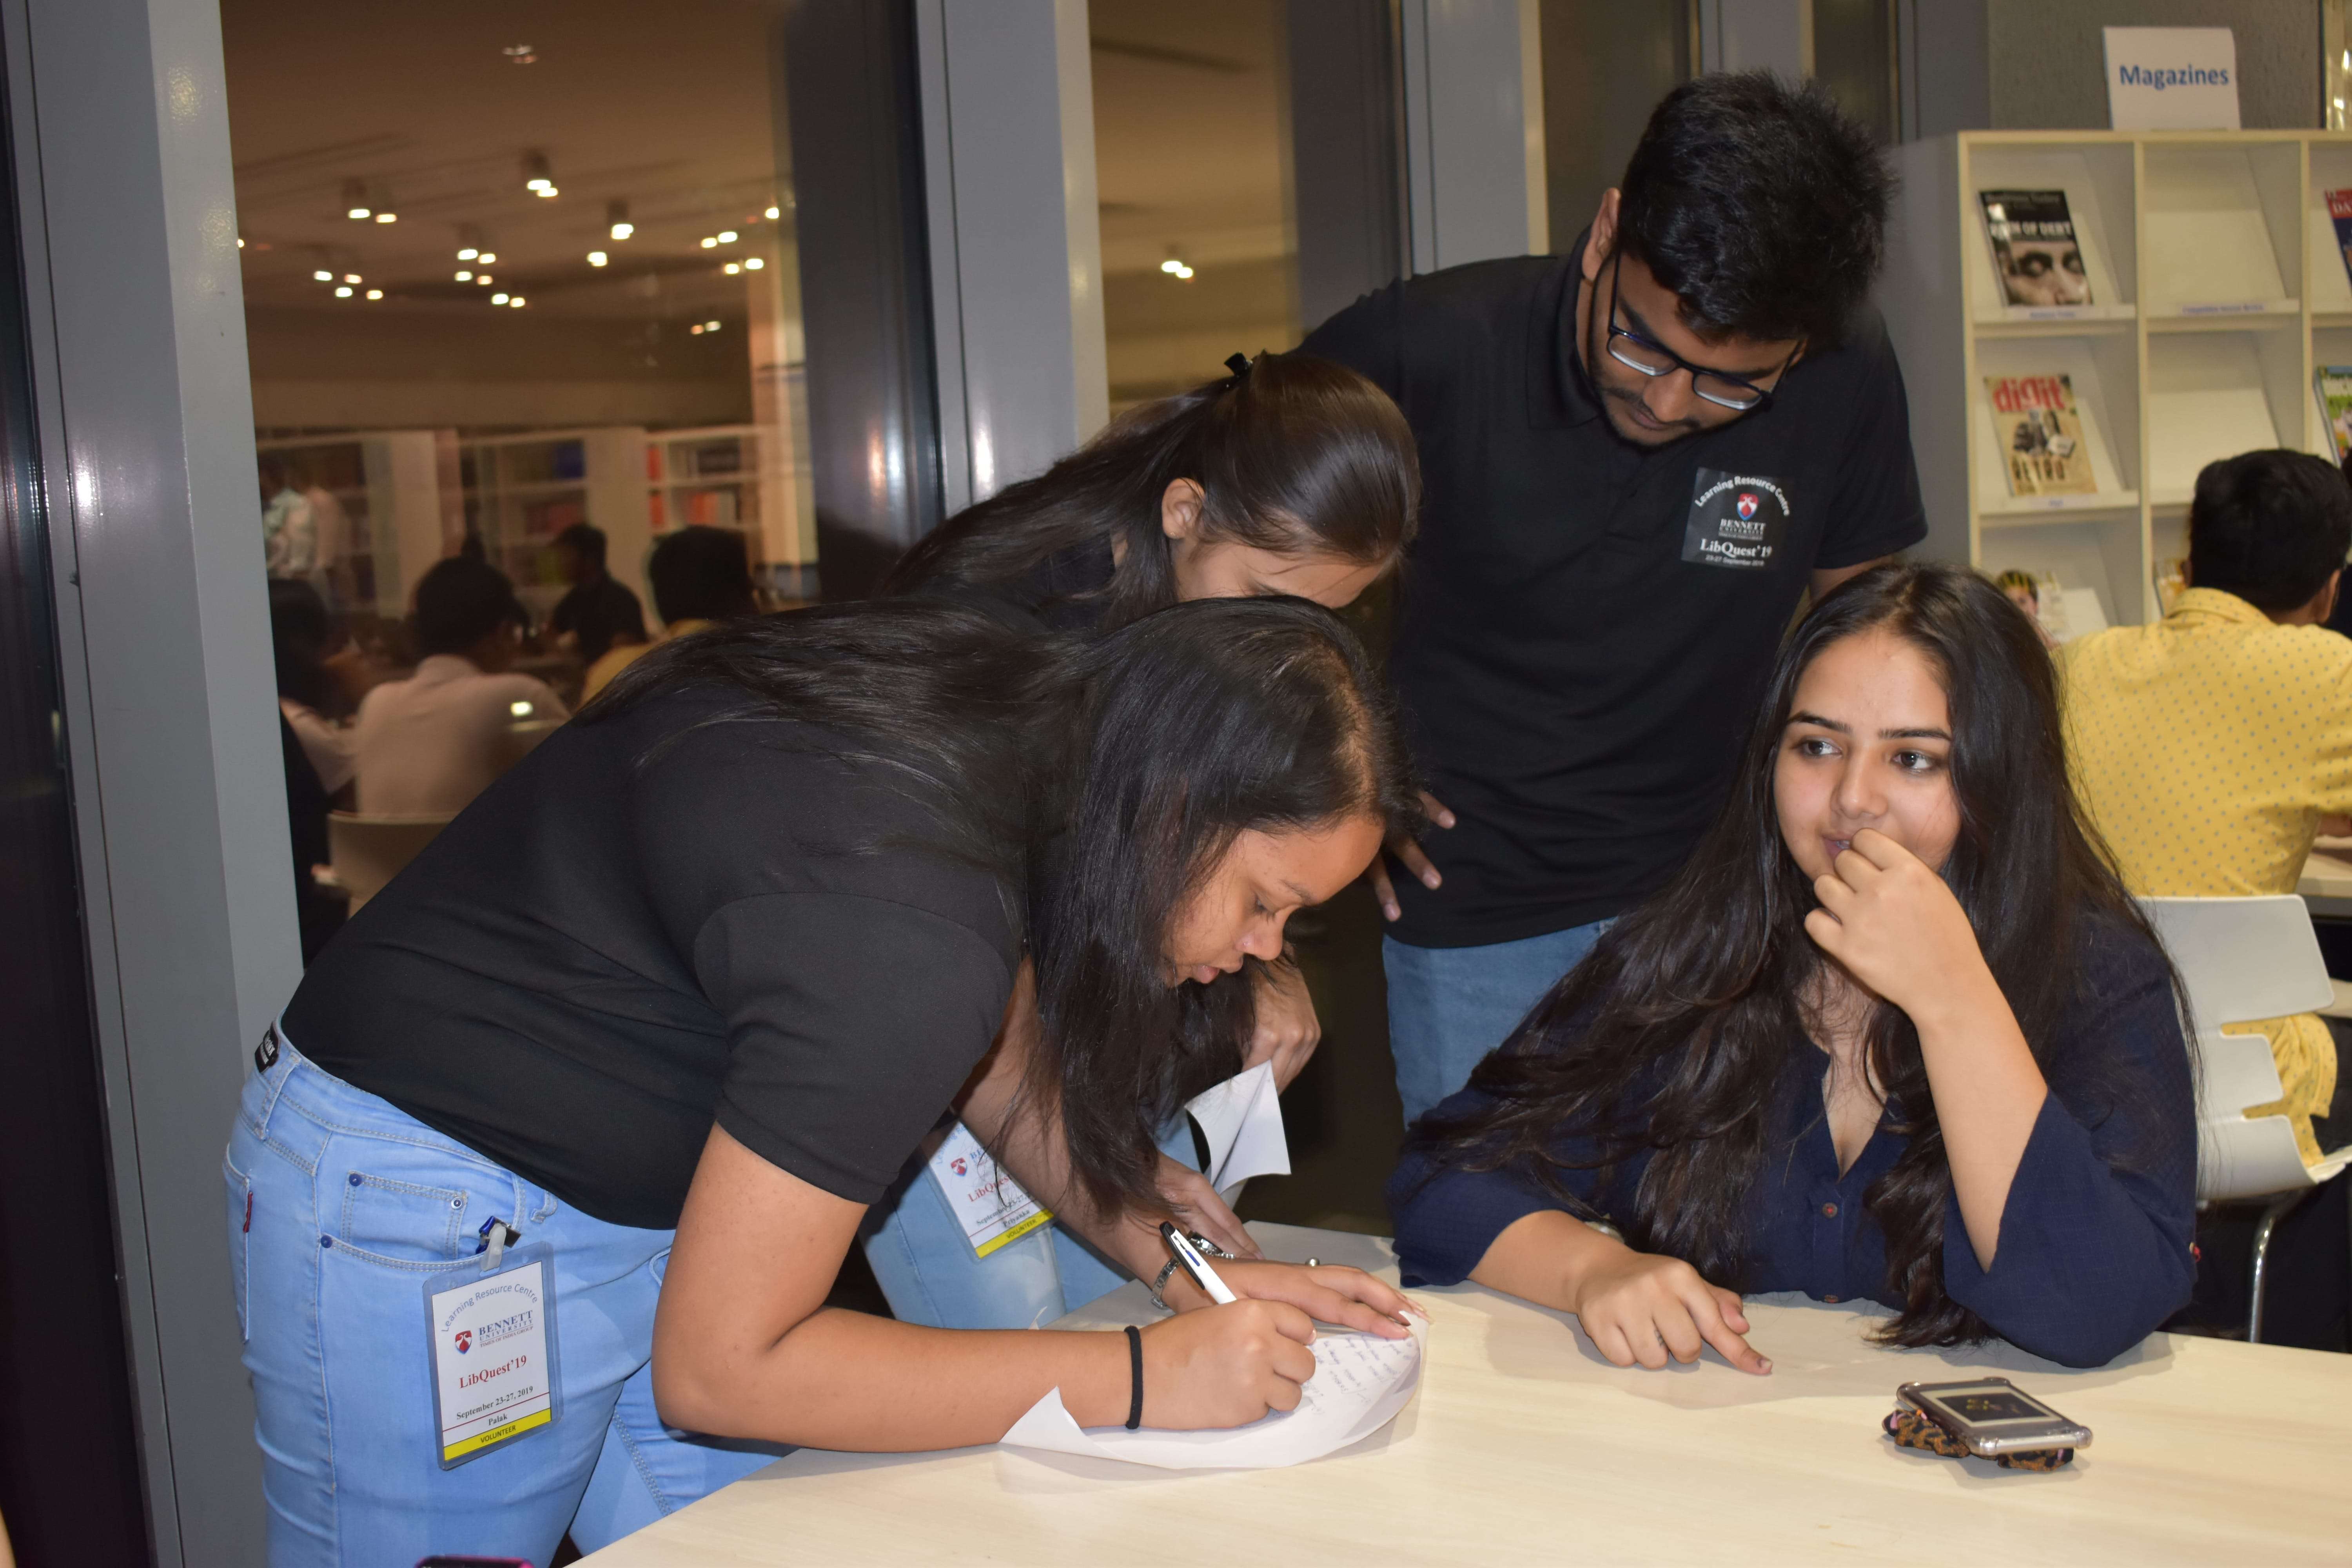 Students registering for the LibQuest ’19 event